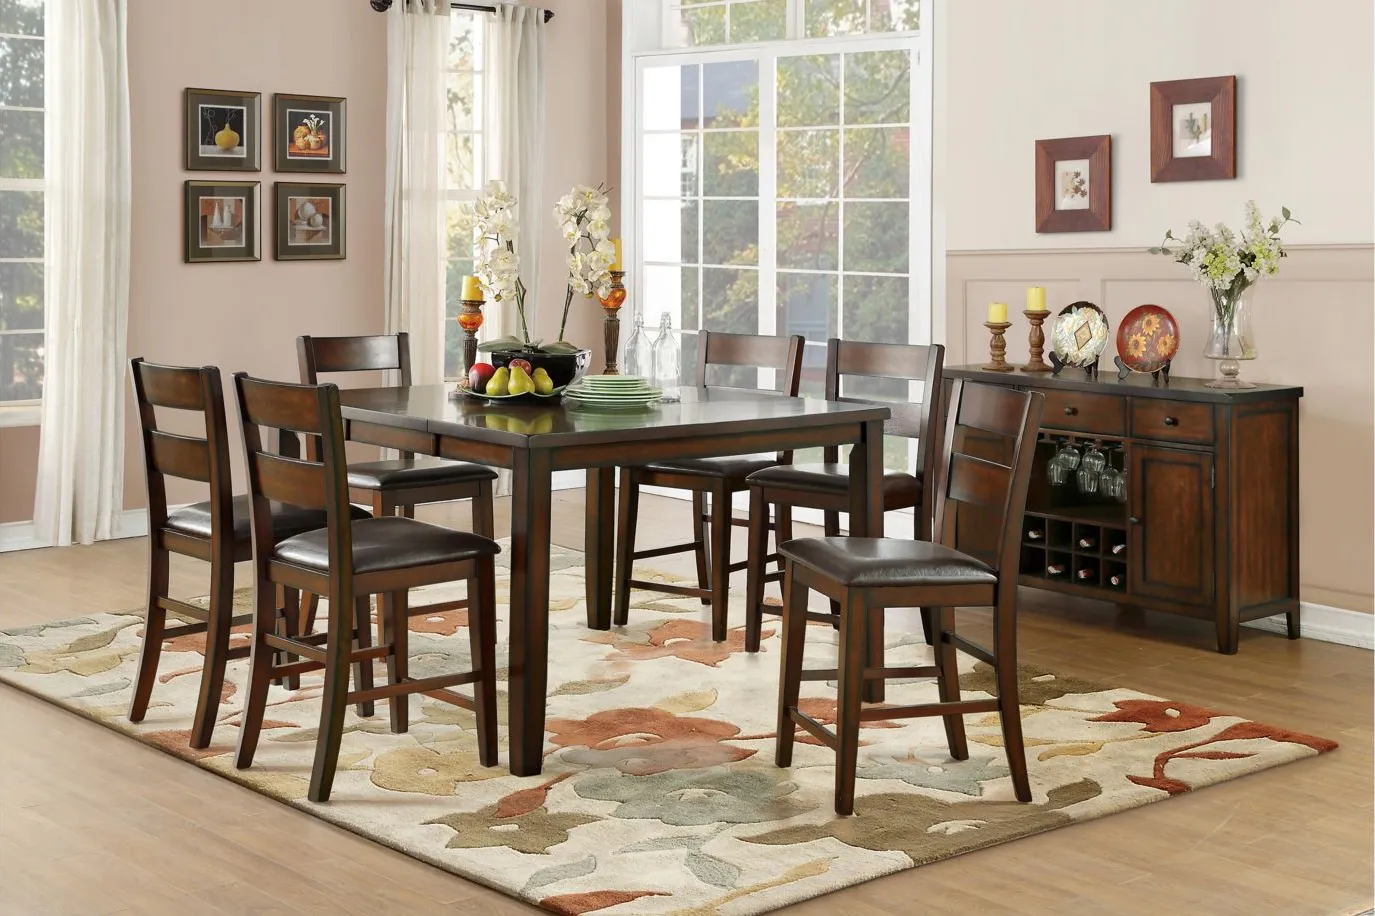 Flannigan 7-pc. Counter Height Dining Set in Light Cherry by Homelegance